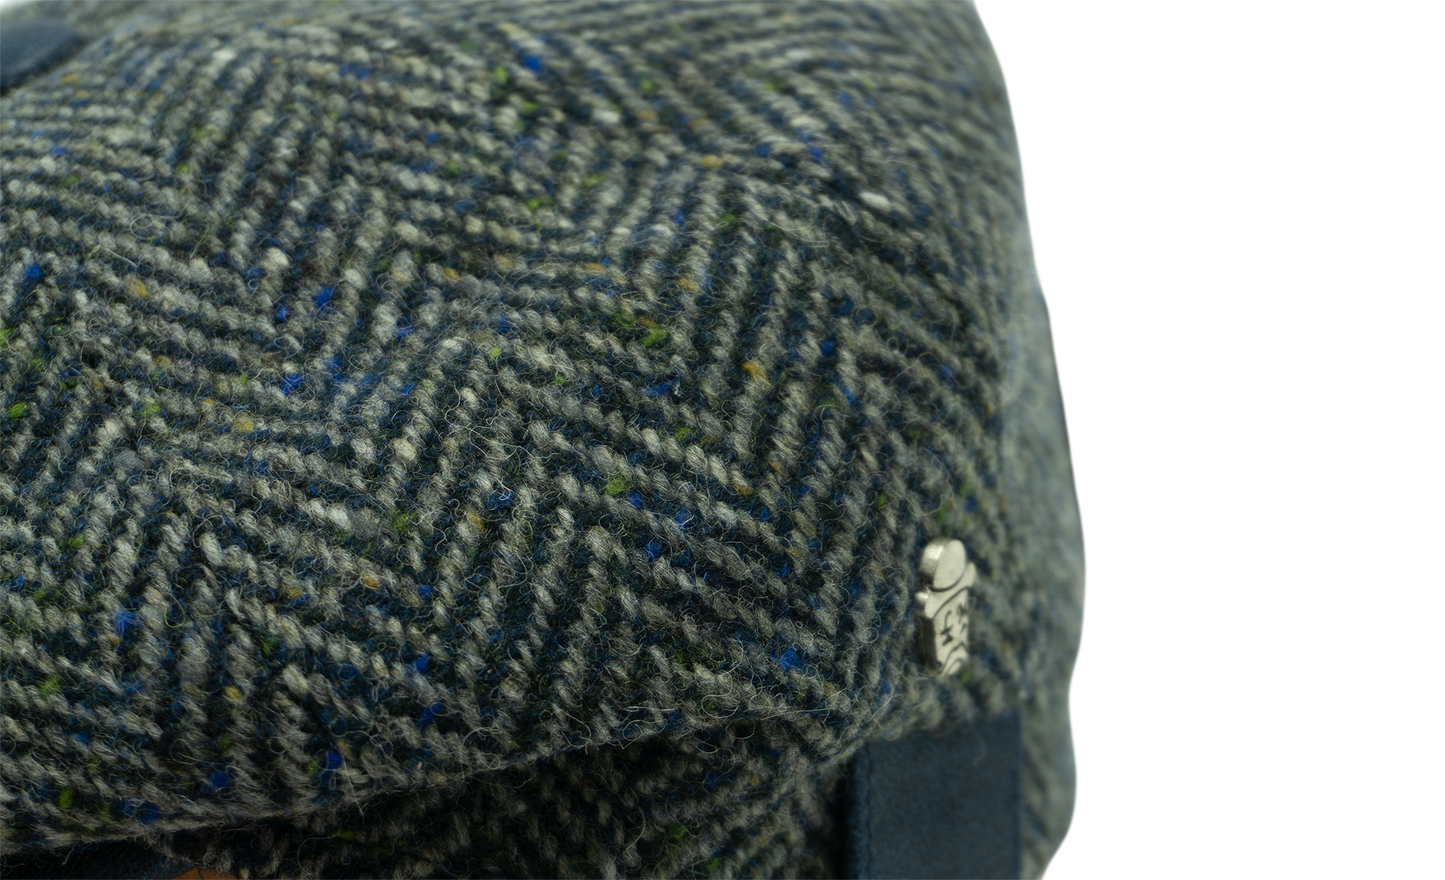 Coppola Donegal (Wool)